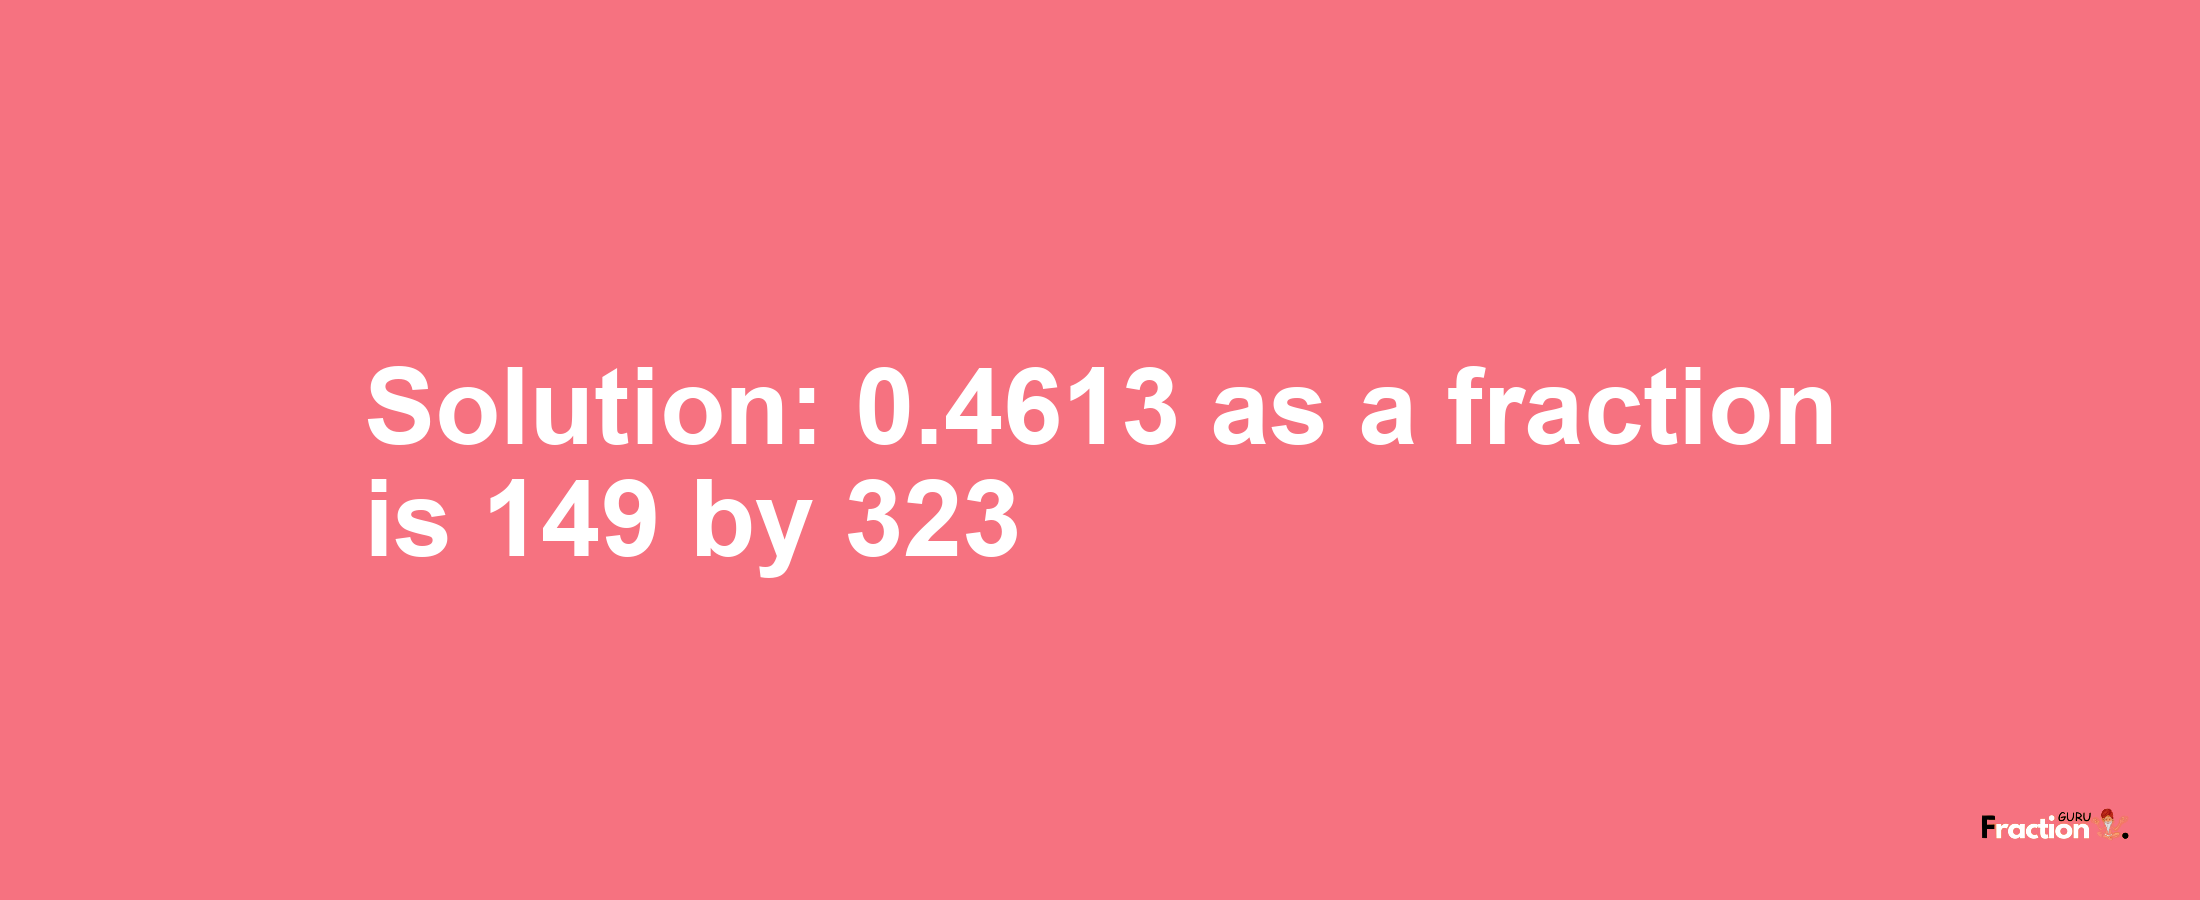 Solution:0.4613 as a fraction is 149/323